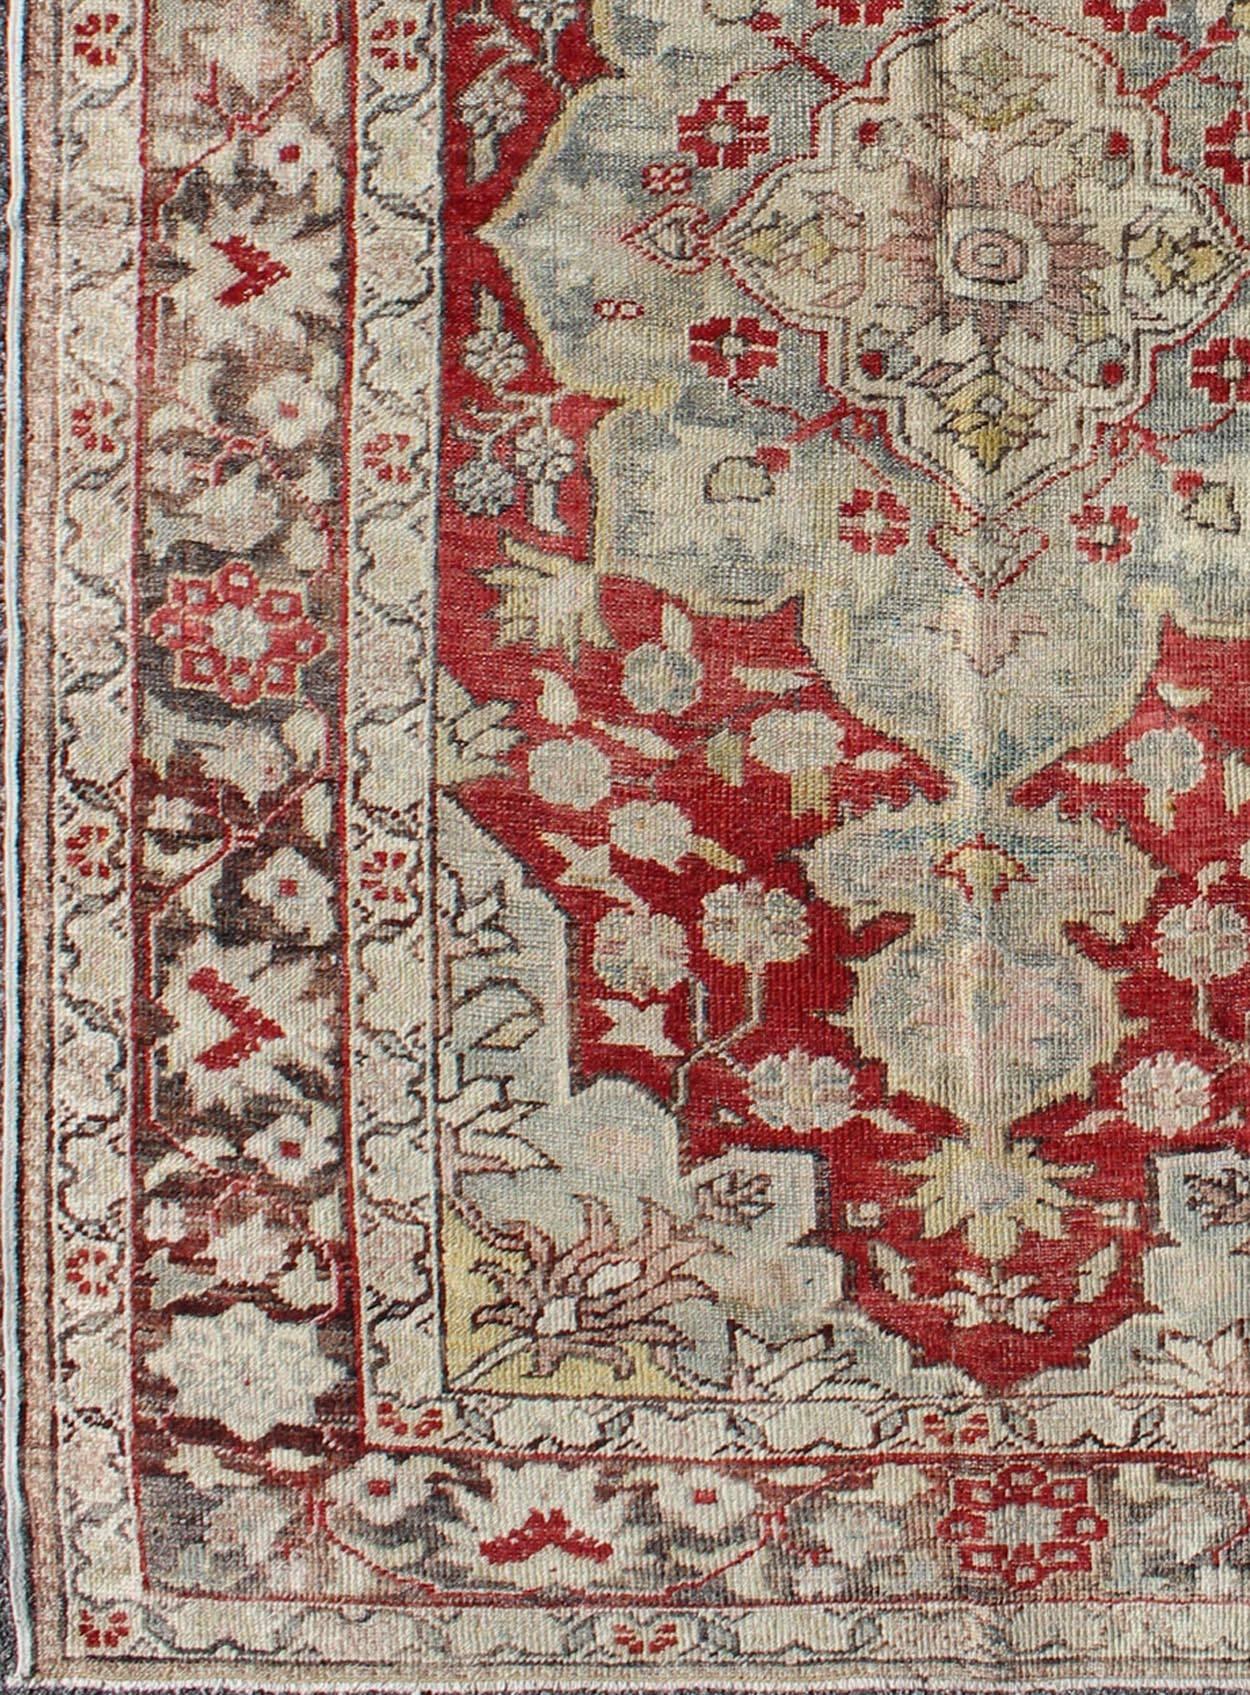 Vintage Hand Knotted Turkish Oushak Rug with Medallion Floral Design, Keivan Woven Arts / rug OSM-19, country of origin / type: Turkey / Oushak, circa mid-20th century

This vintage Turkish Oushak carpet (circa mid-20th century) features a central